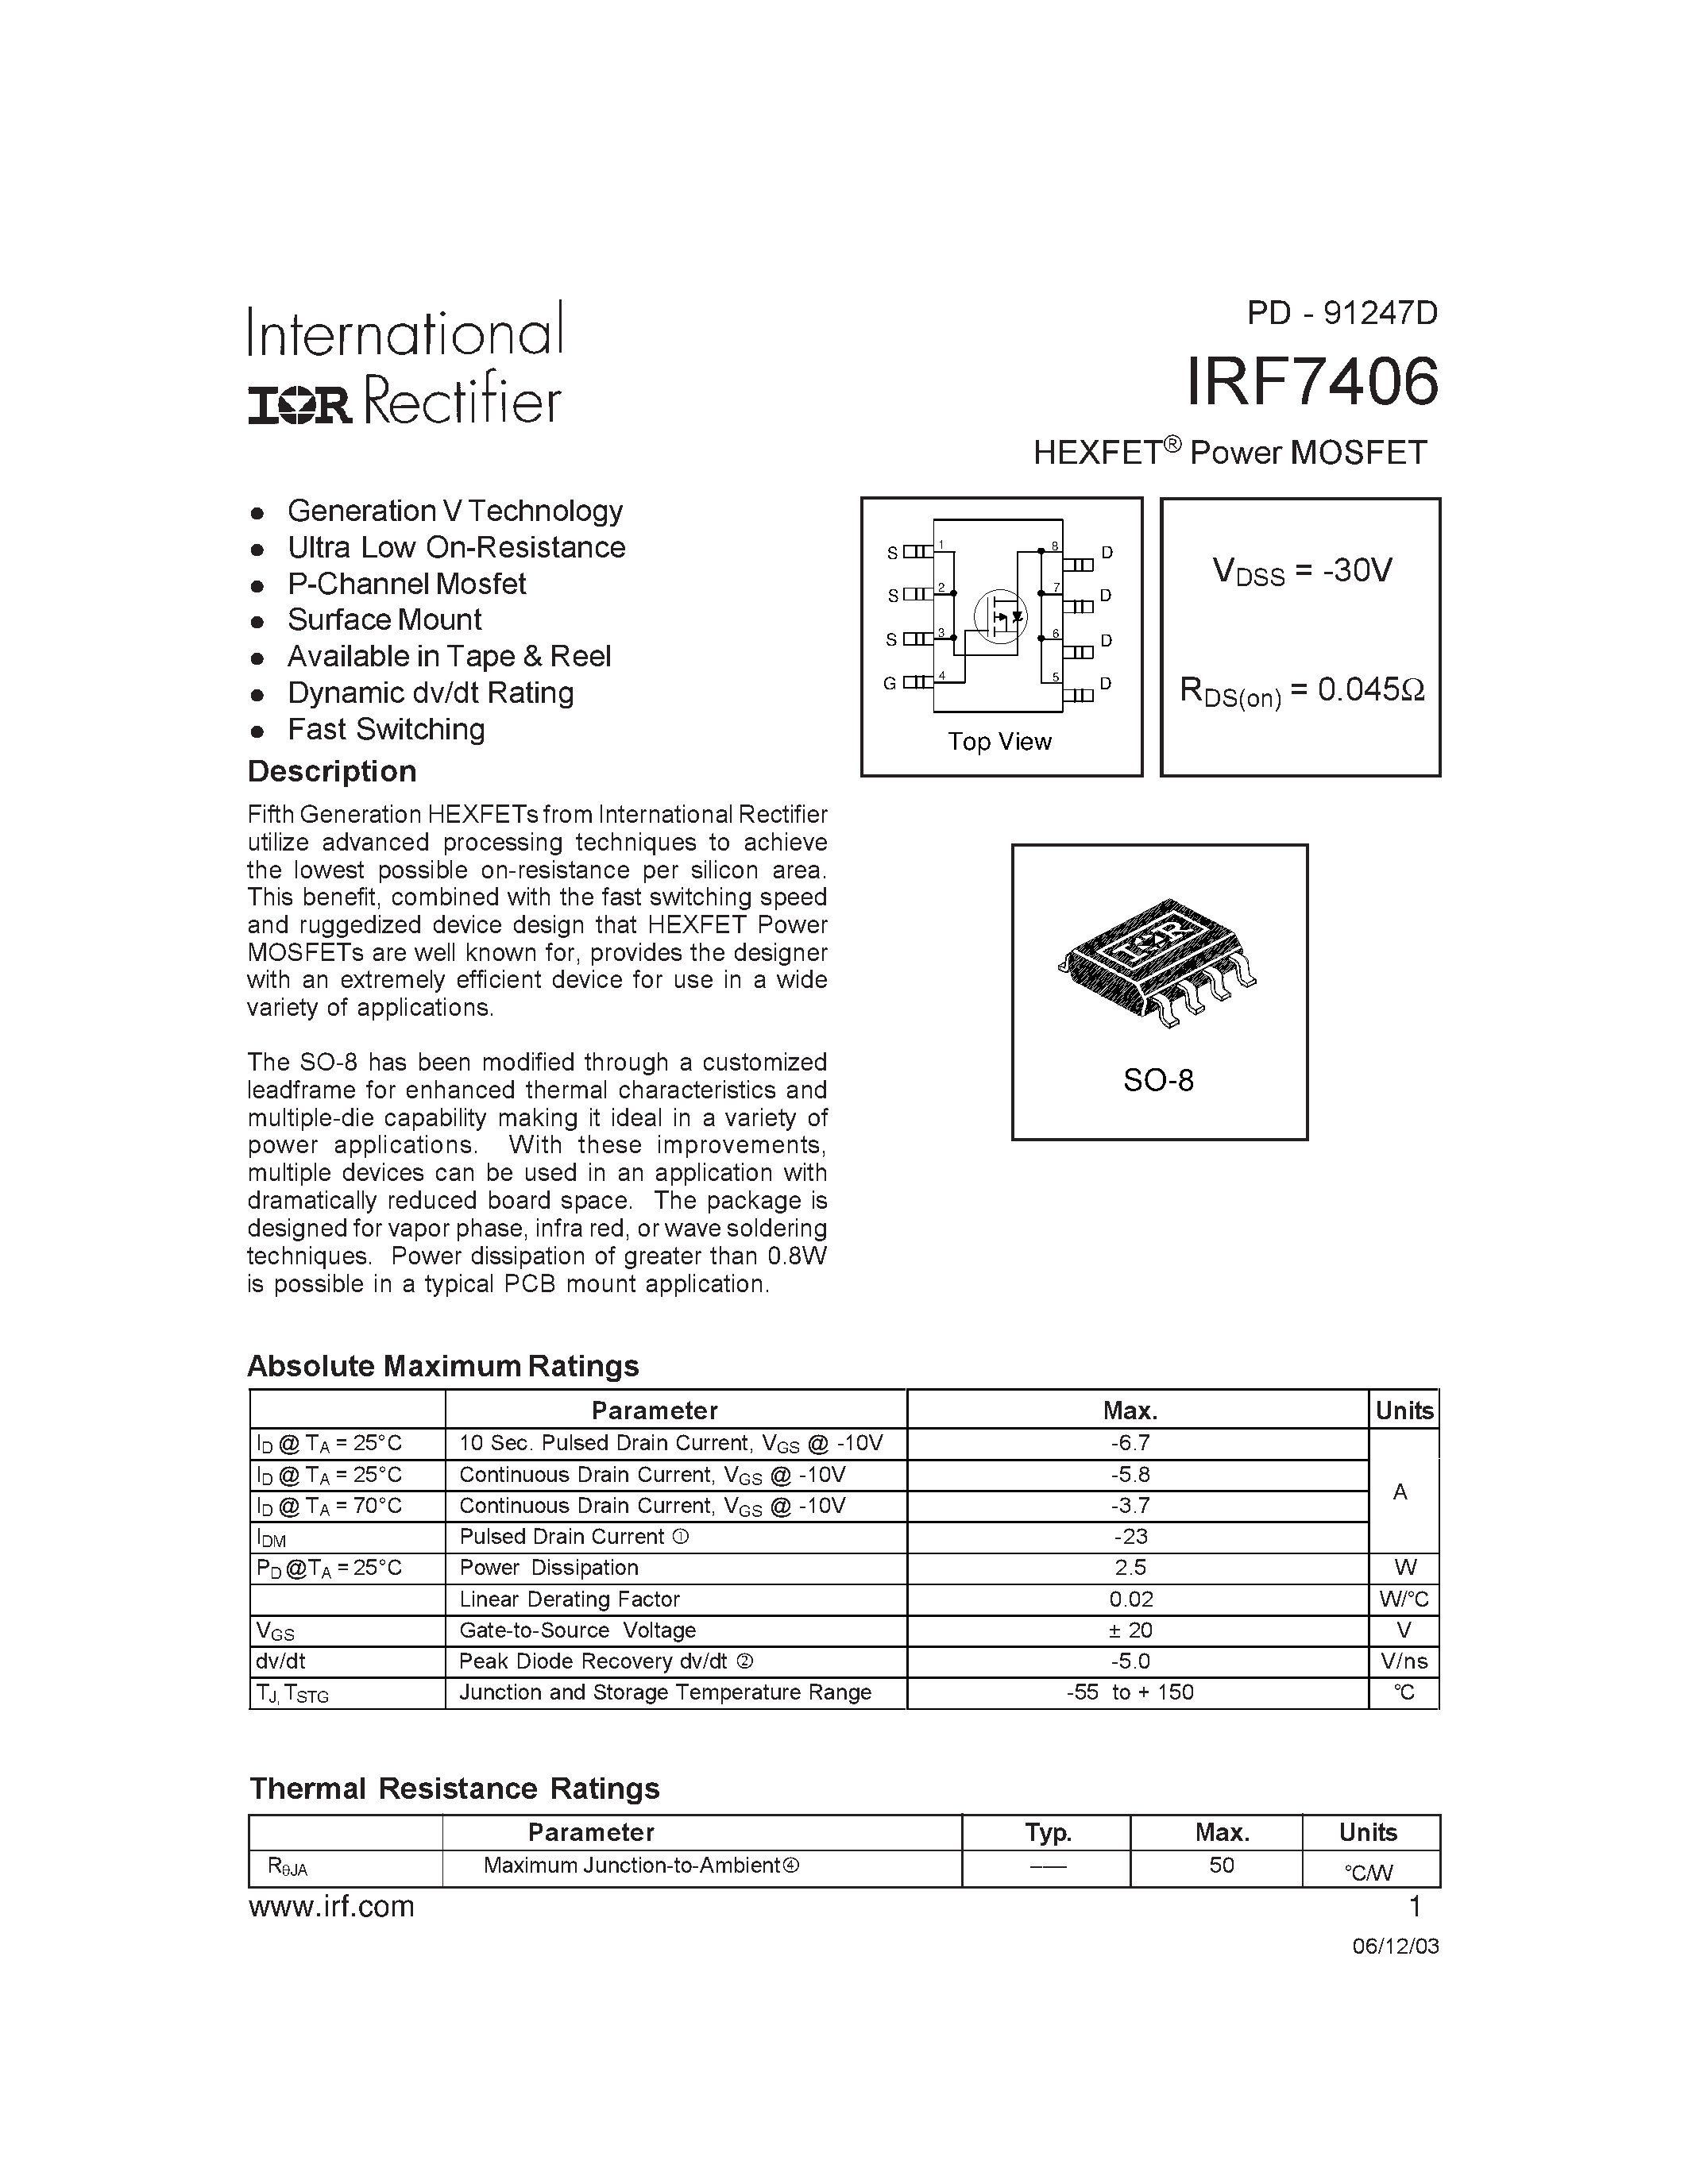 Datasheet IRF7406 - HEXFET POWER MOSFET page 1